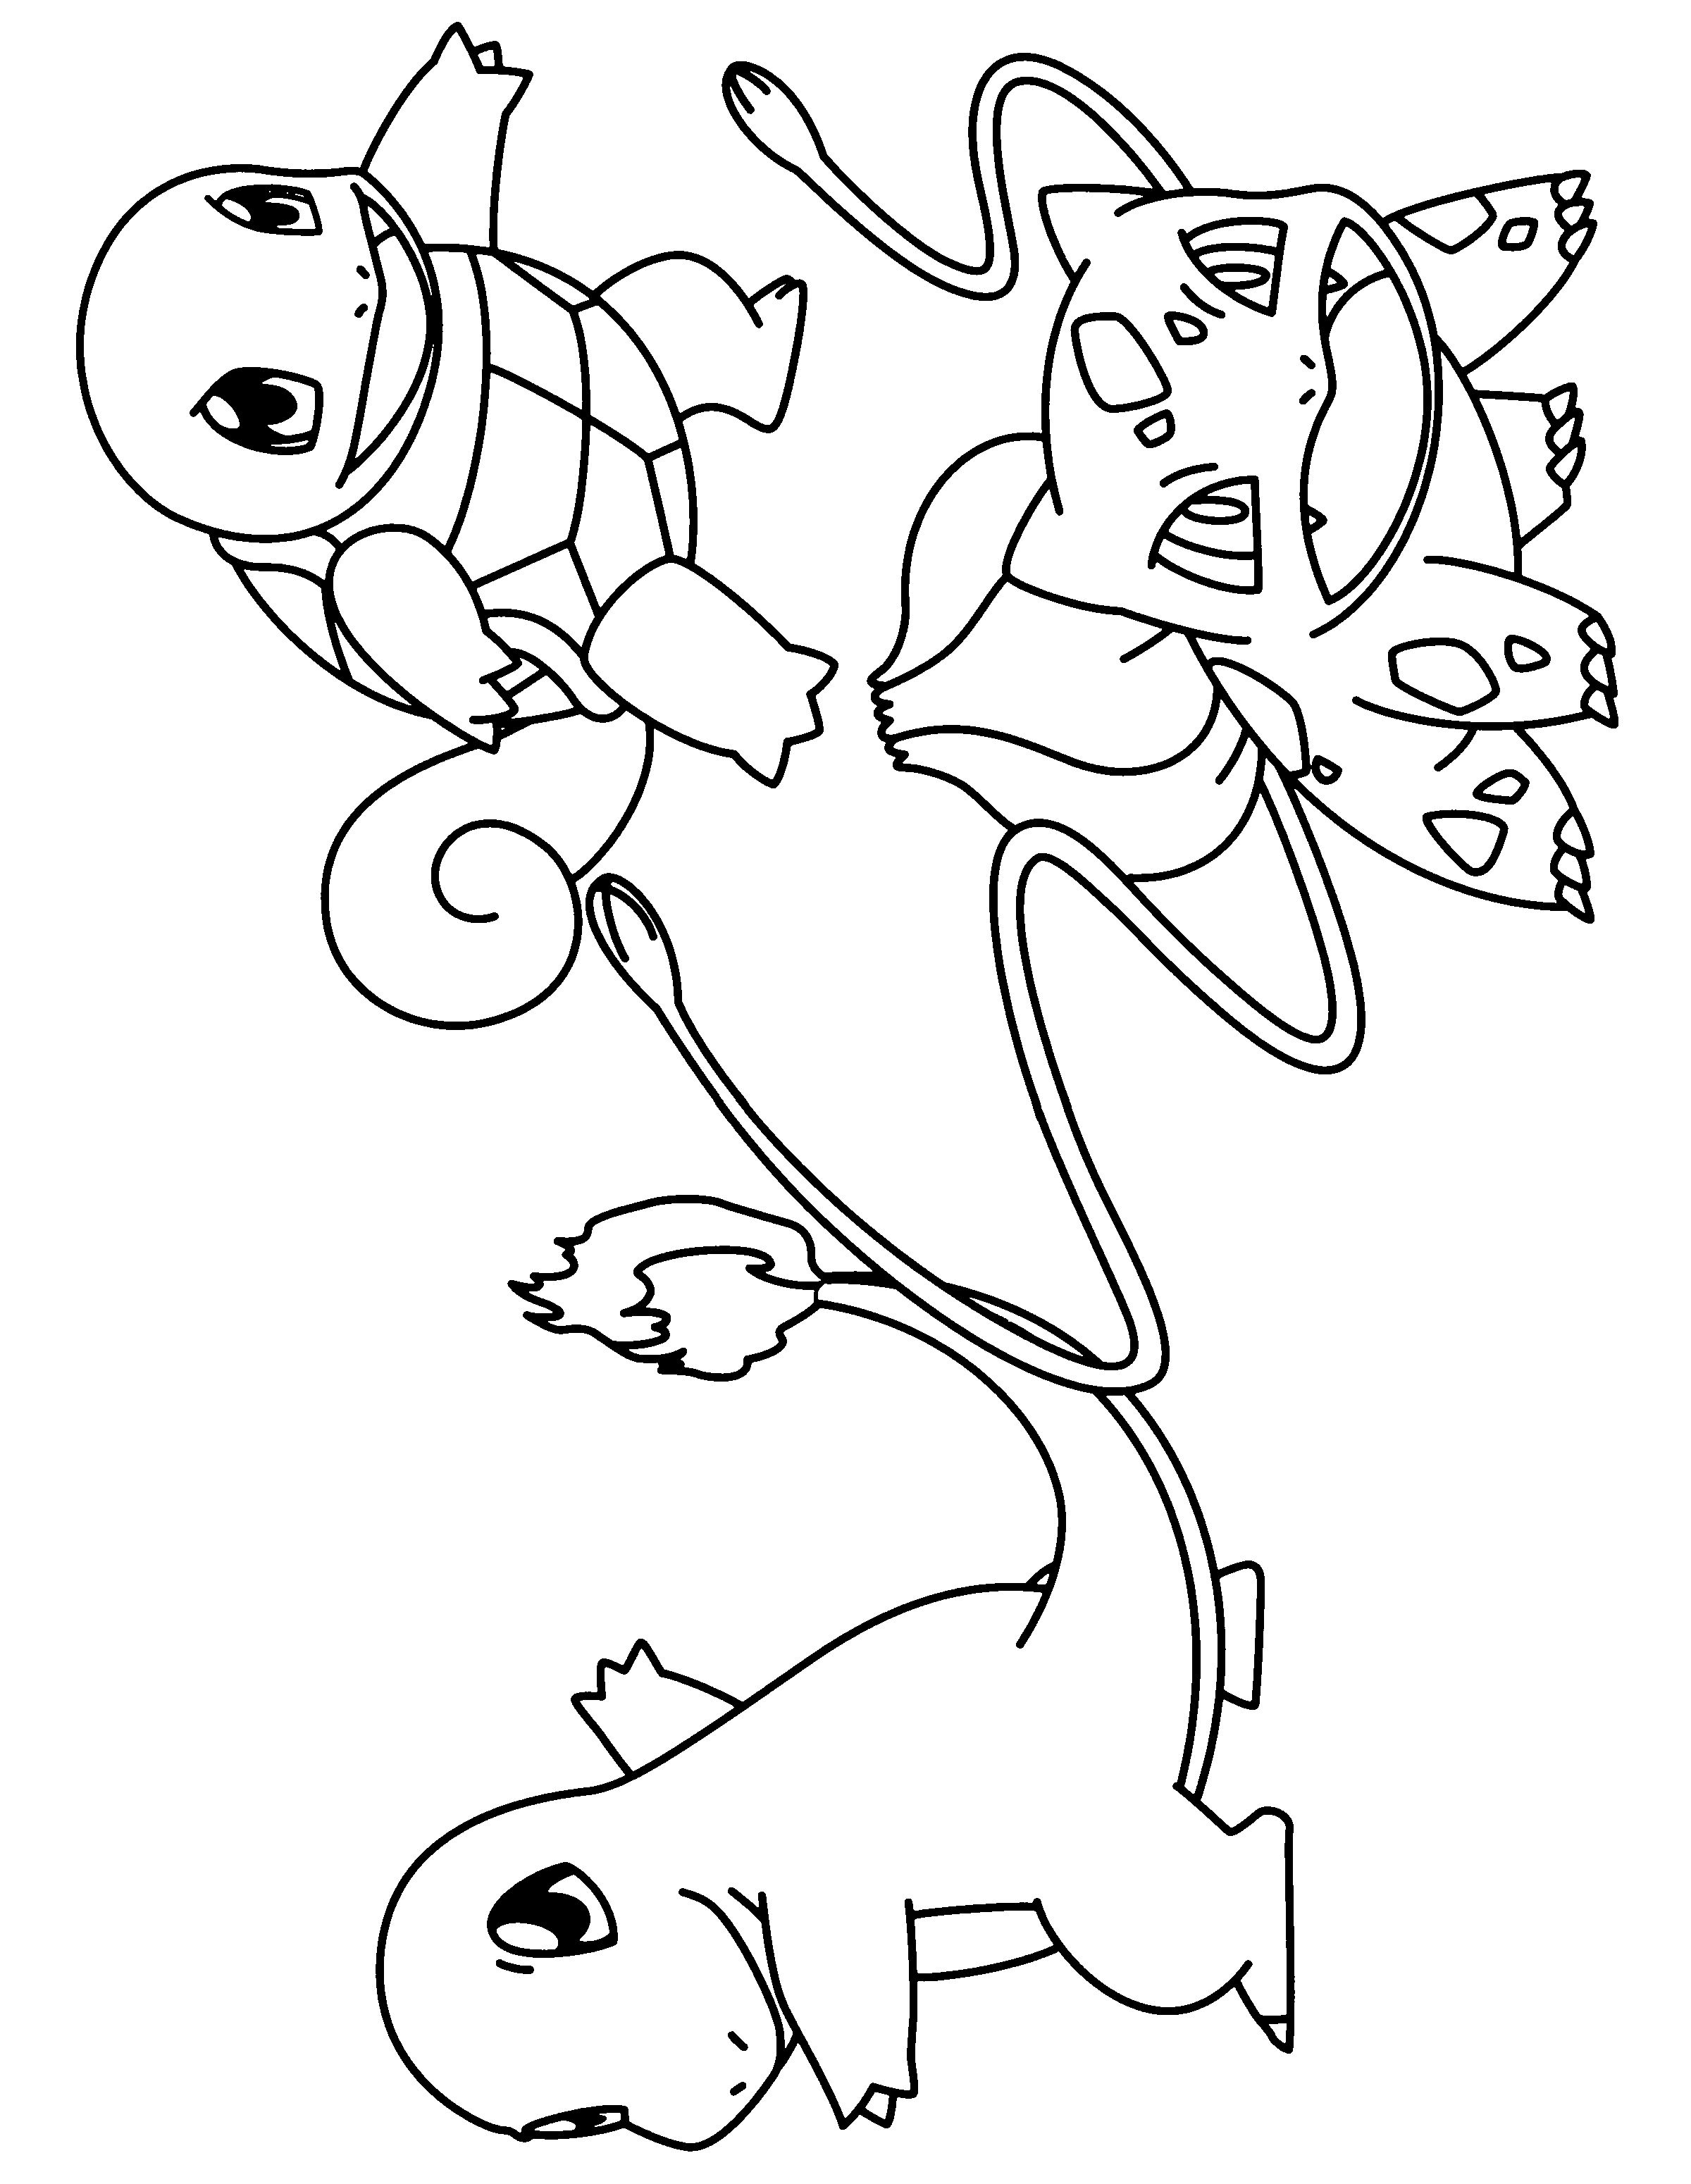 squirtle coloring page squirtle coloring pages to download and print for free squirtle page coloring 